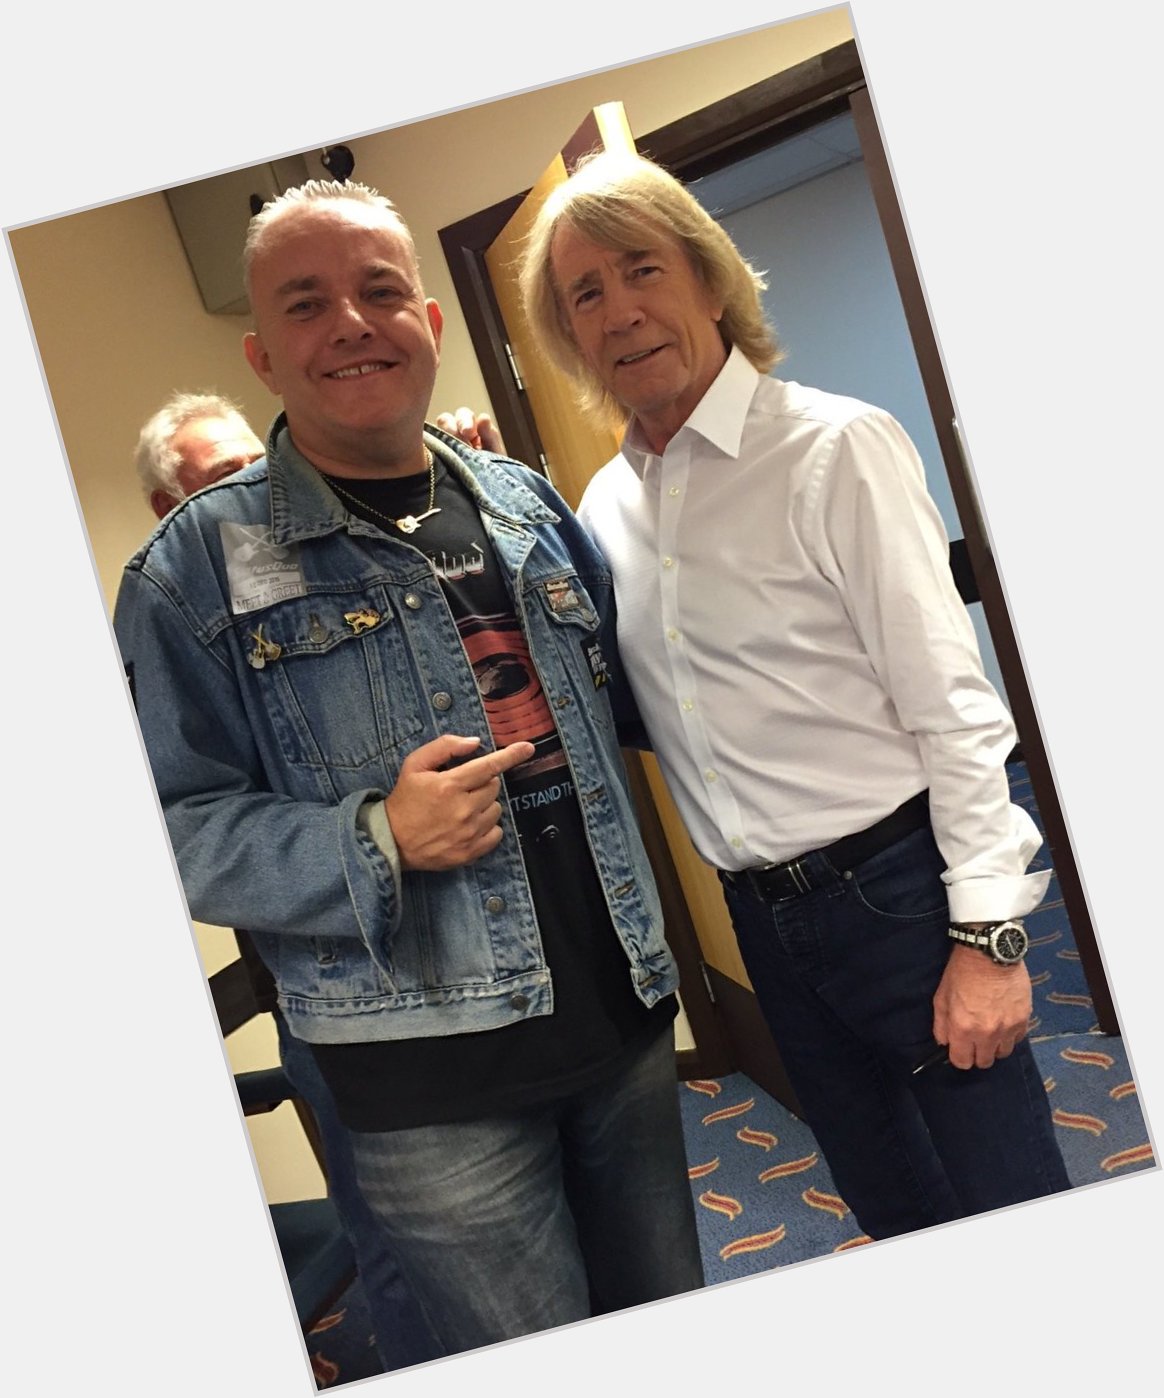 Happy birthday Rick Parfitt expect you will be up there,having a few with Lemmy and the gang   